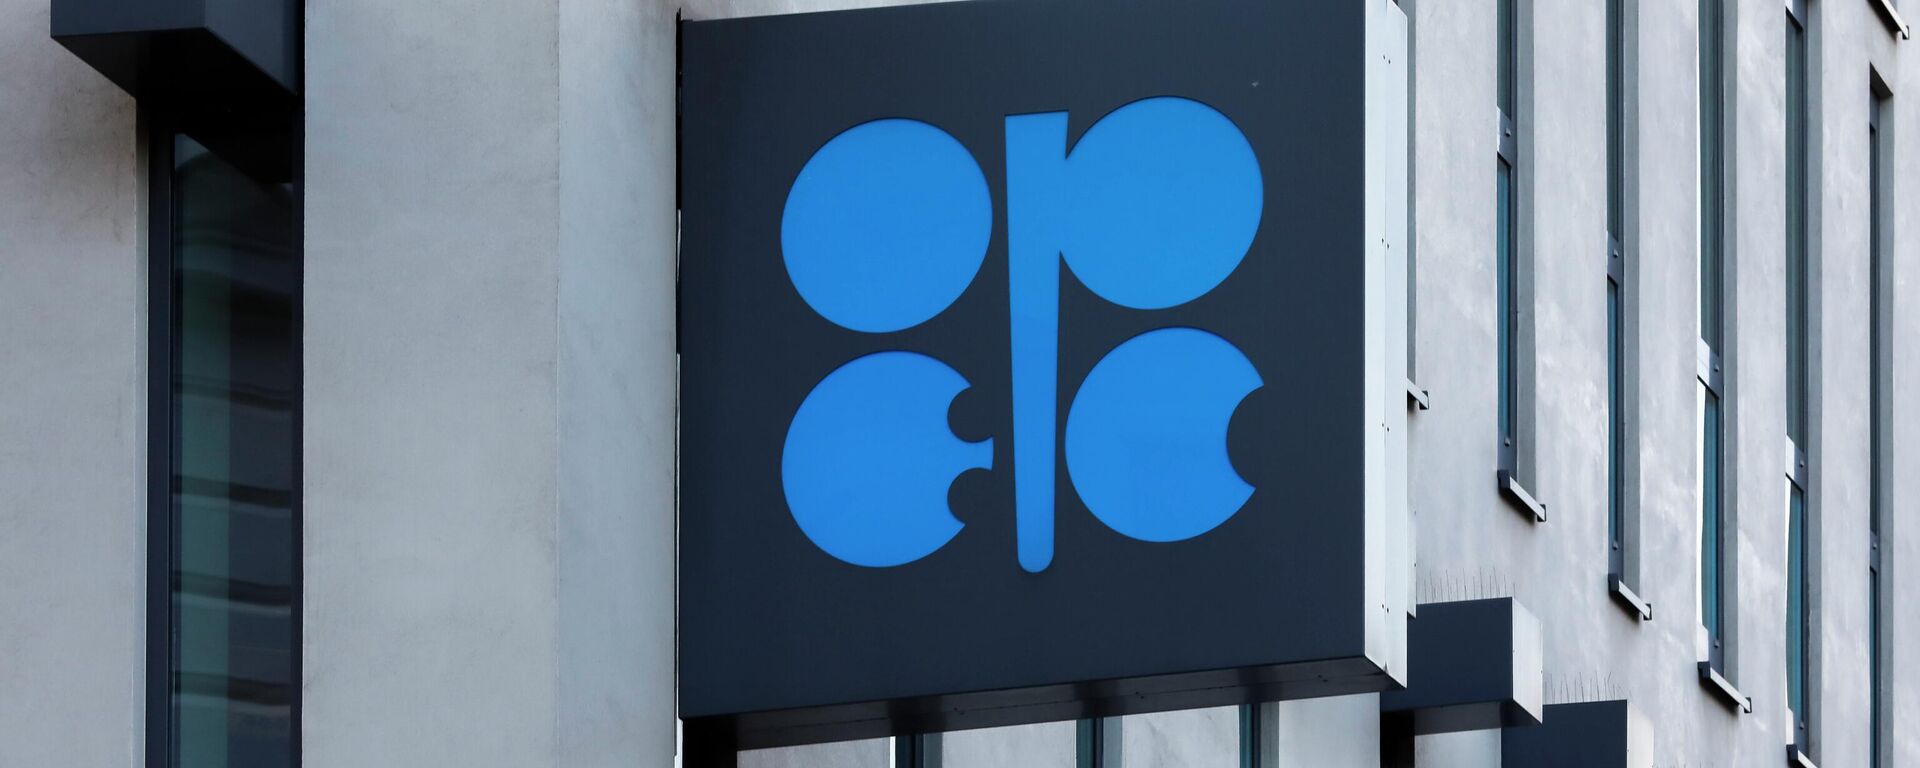 The logo of the Organization of the Petroleum Exporting Countries (OPEC) is seen outside of OPEC's headquarters in Vienna, Austria, Thursday, March 3, 2022.  - Sputnik International, 1920, 26.11.2022